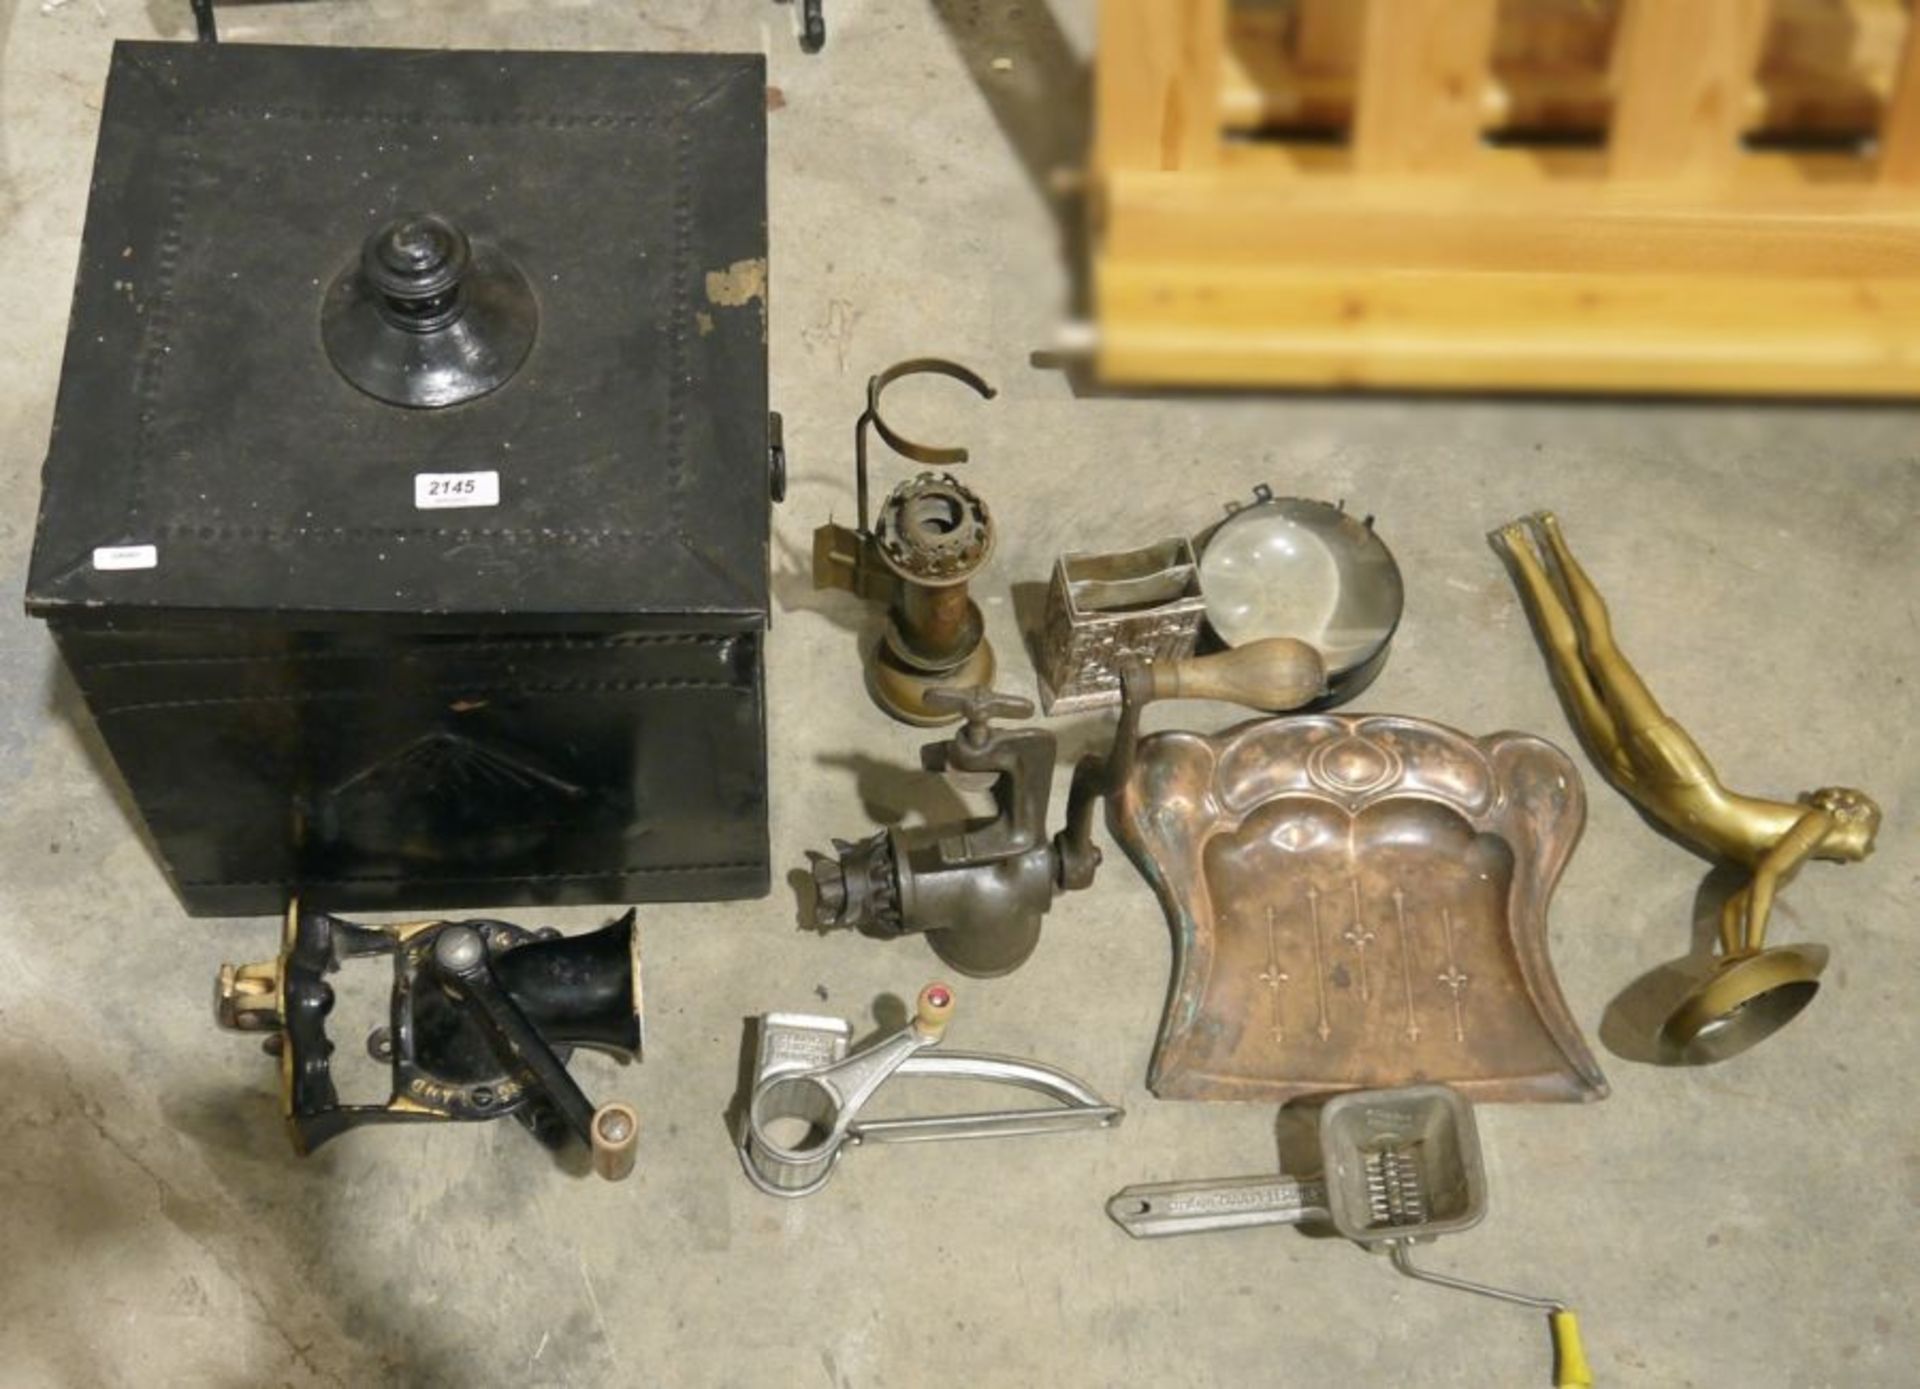 Art Nouveau copper crumb tray, a Universal No.1 meat grinder and further grinders, a vintage